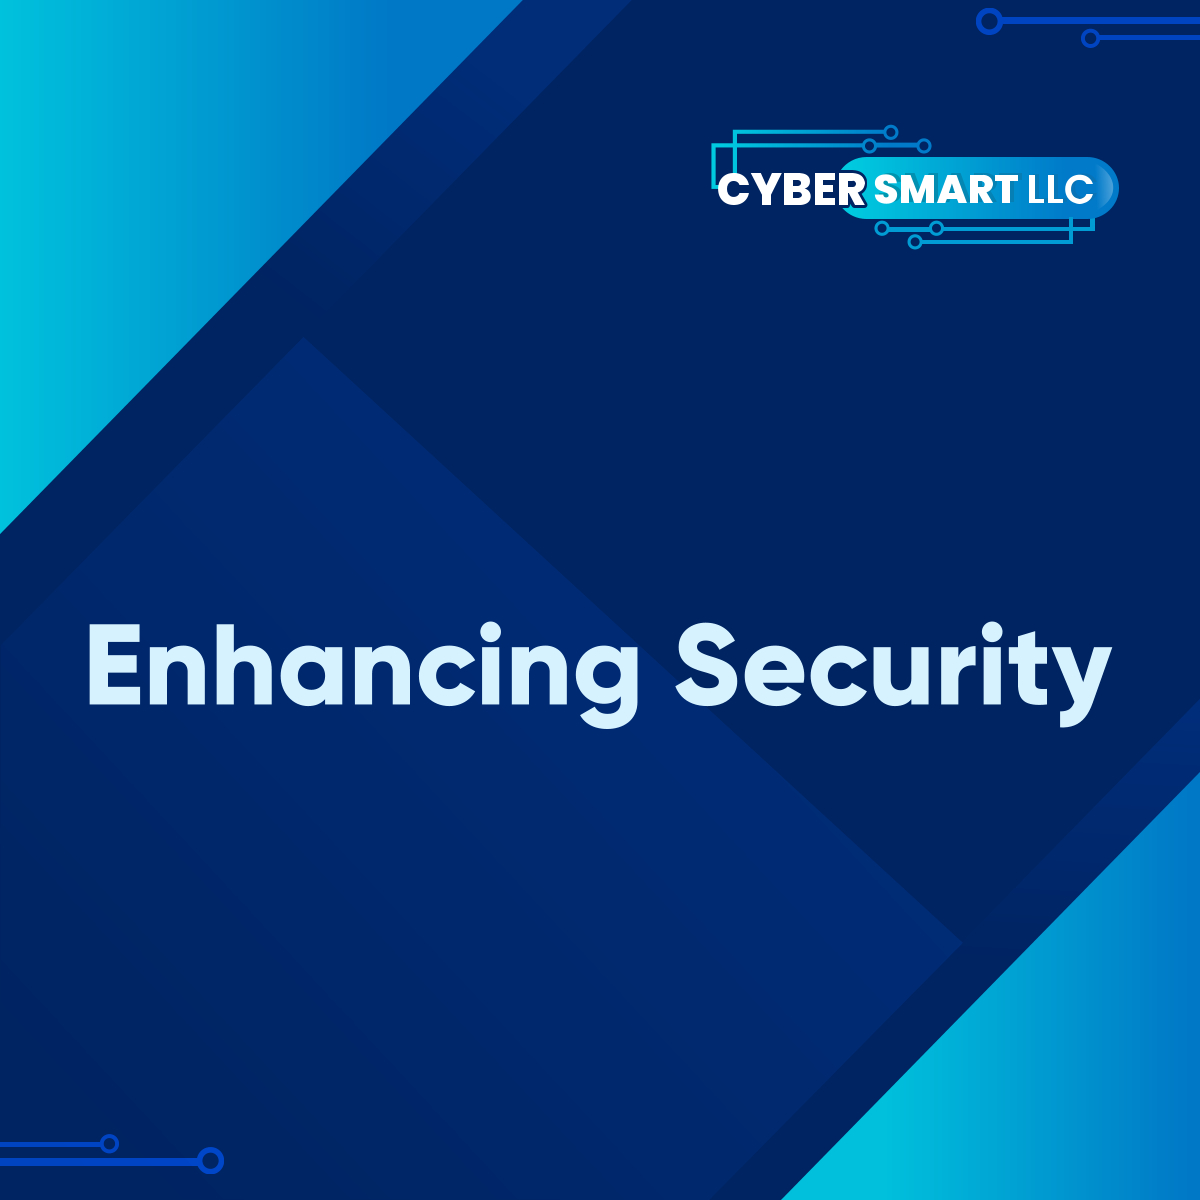 We are committed to proactively combatting cyber threats, safeguarding data, and protecting sensitive information. We want to empower you so you can prepare to overcome future challenges in this rapidly changing digital world. You can count on us!

#EnhancingSecurity